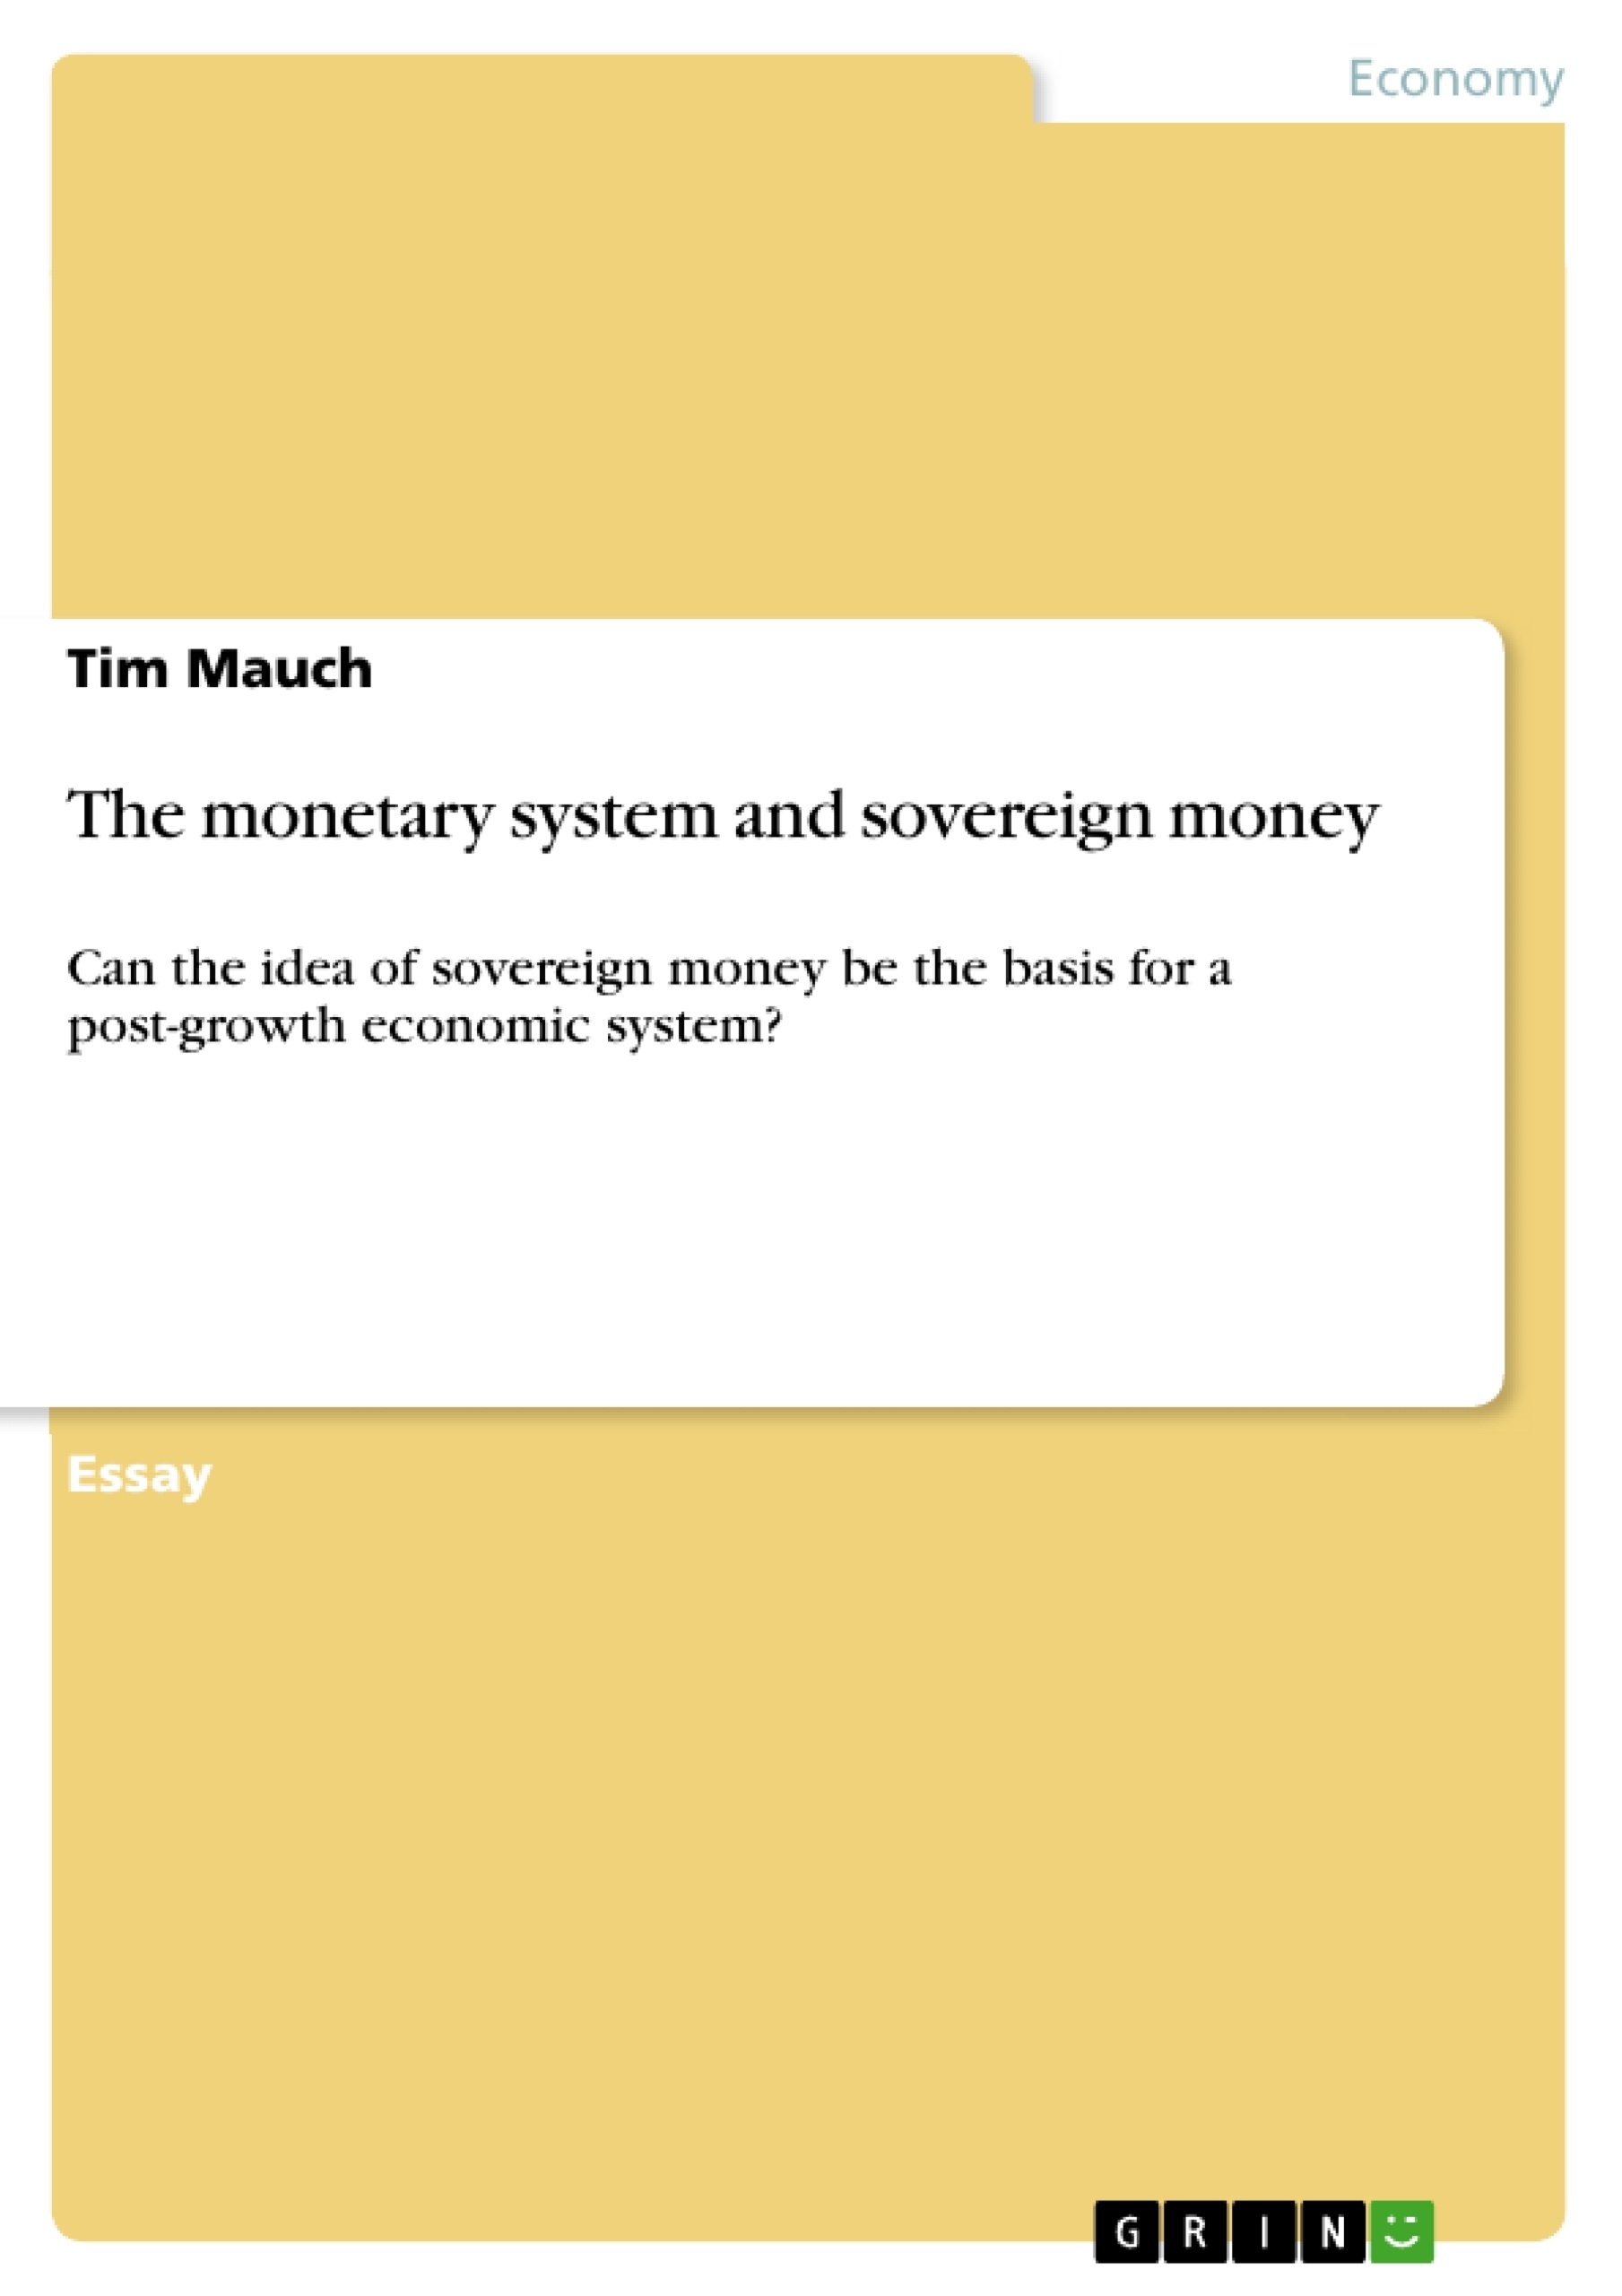 Título: The monetary system and sovereign money